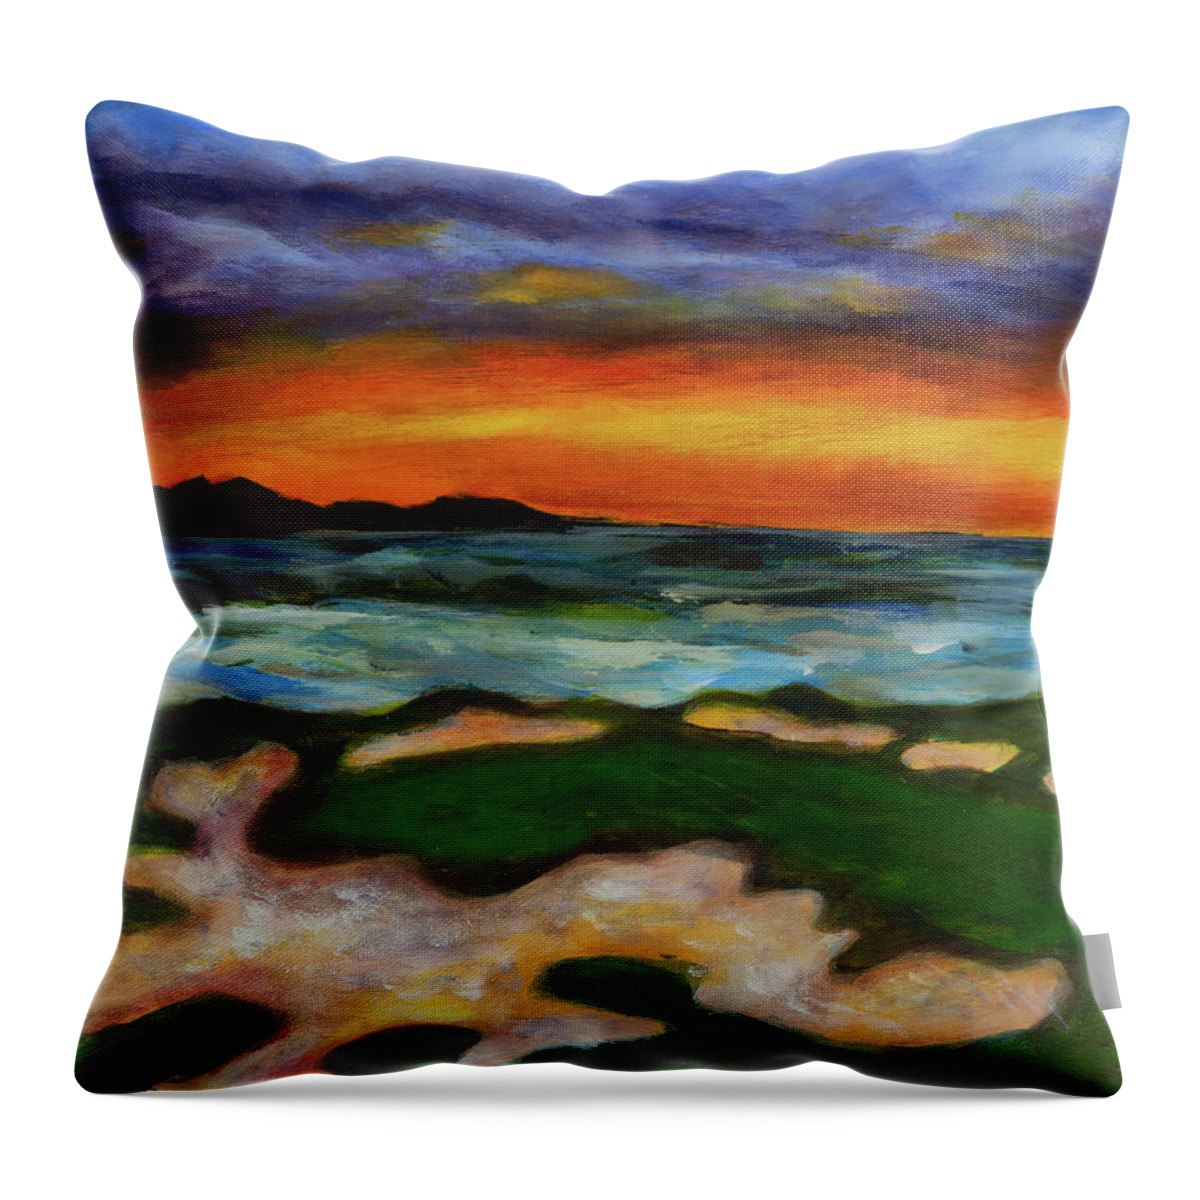 Landscape Throw Pillow featuring the painting Ocean Cliff / Crashing Waves by Janet Yu